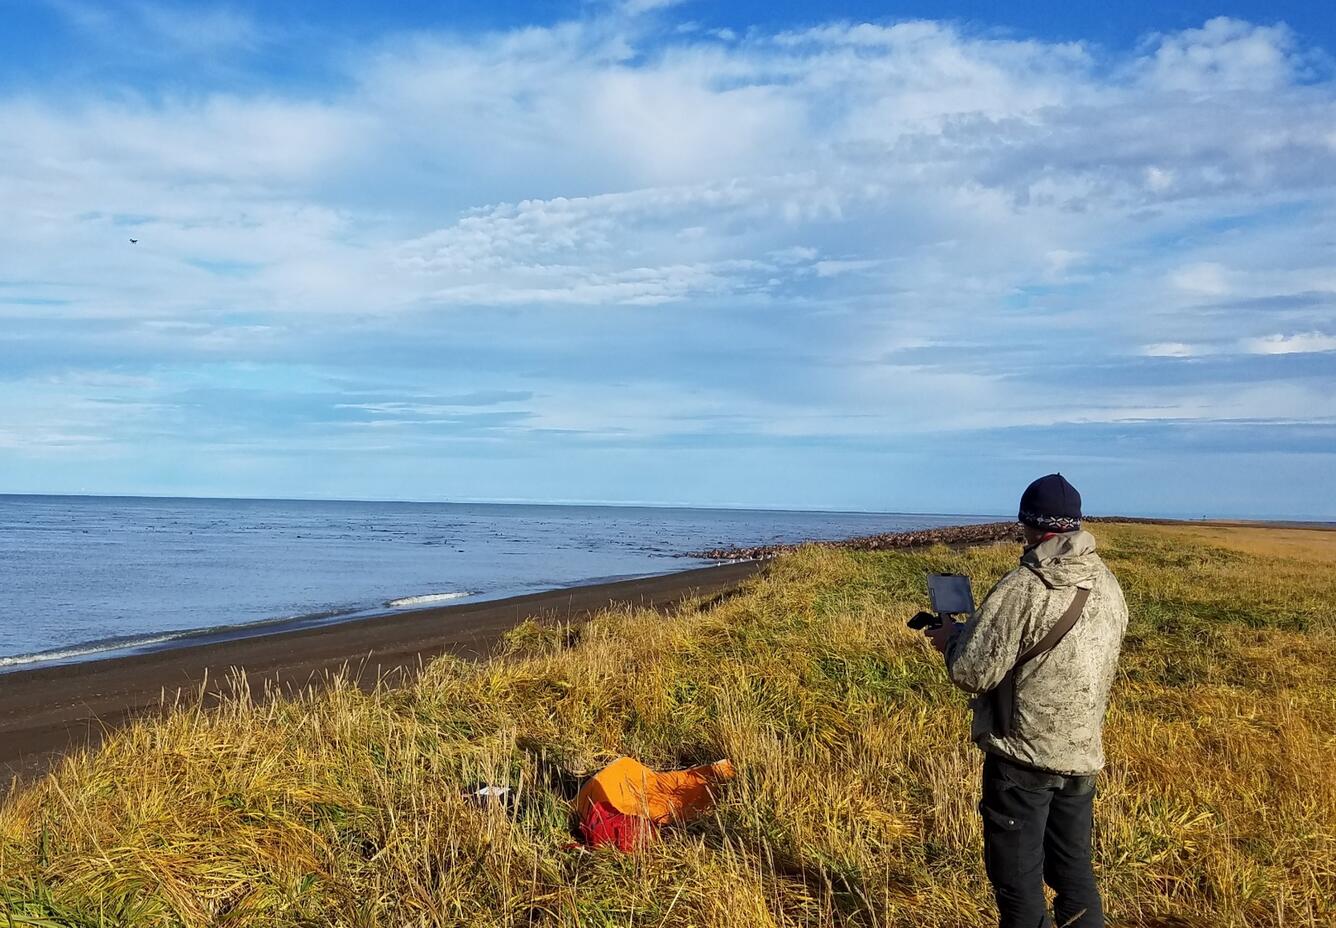 USGS biologist using a drone to survey walruses resting on shore